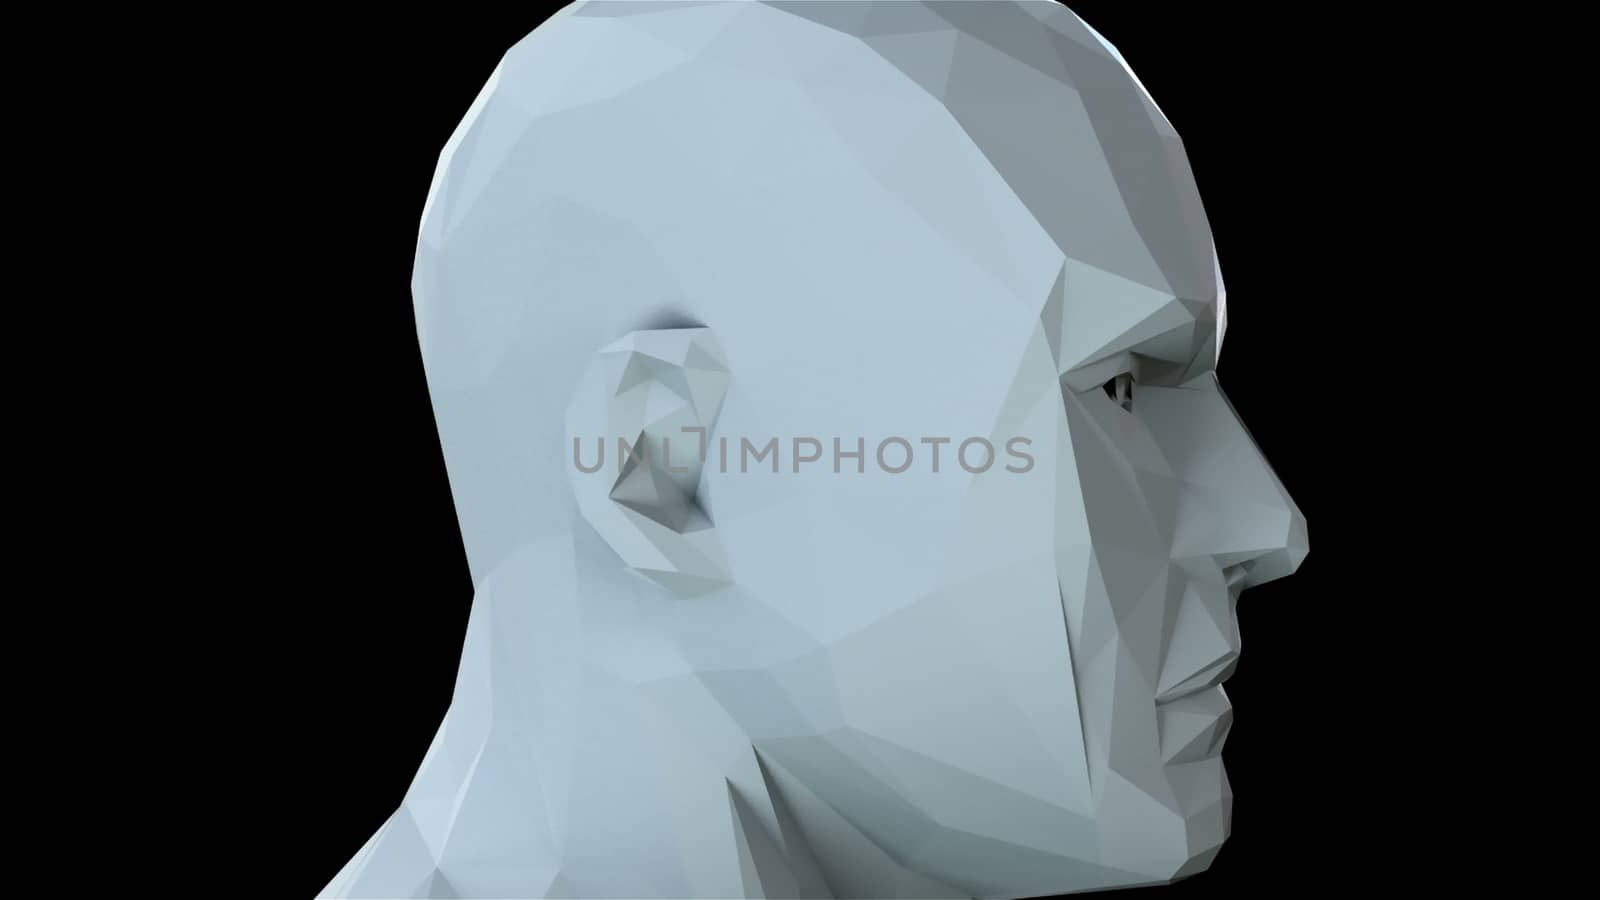 Low poly head, art objects, simple style in the space, 3d rendering computer generated background